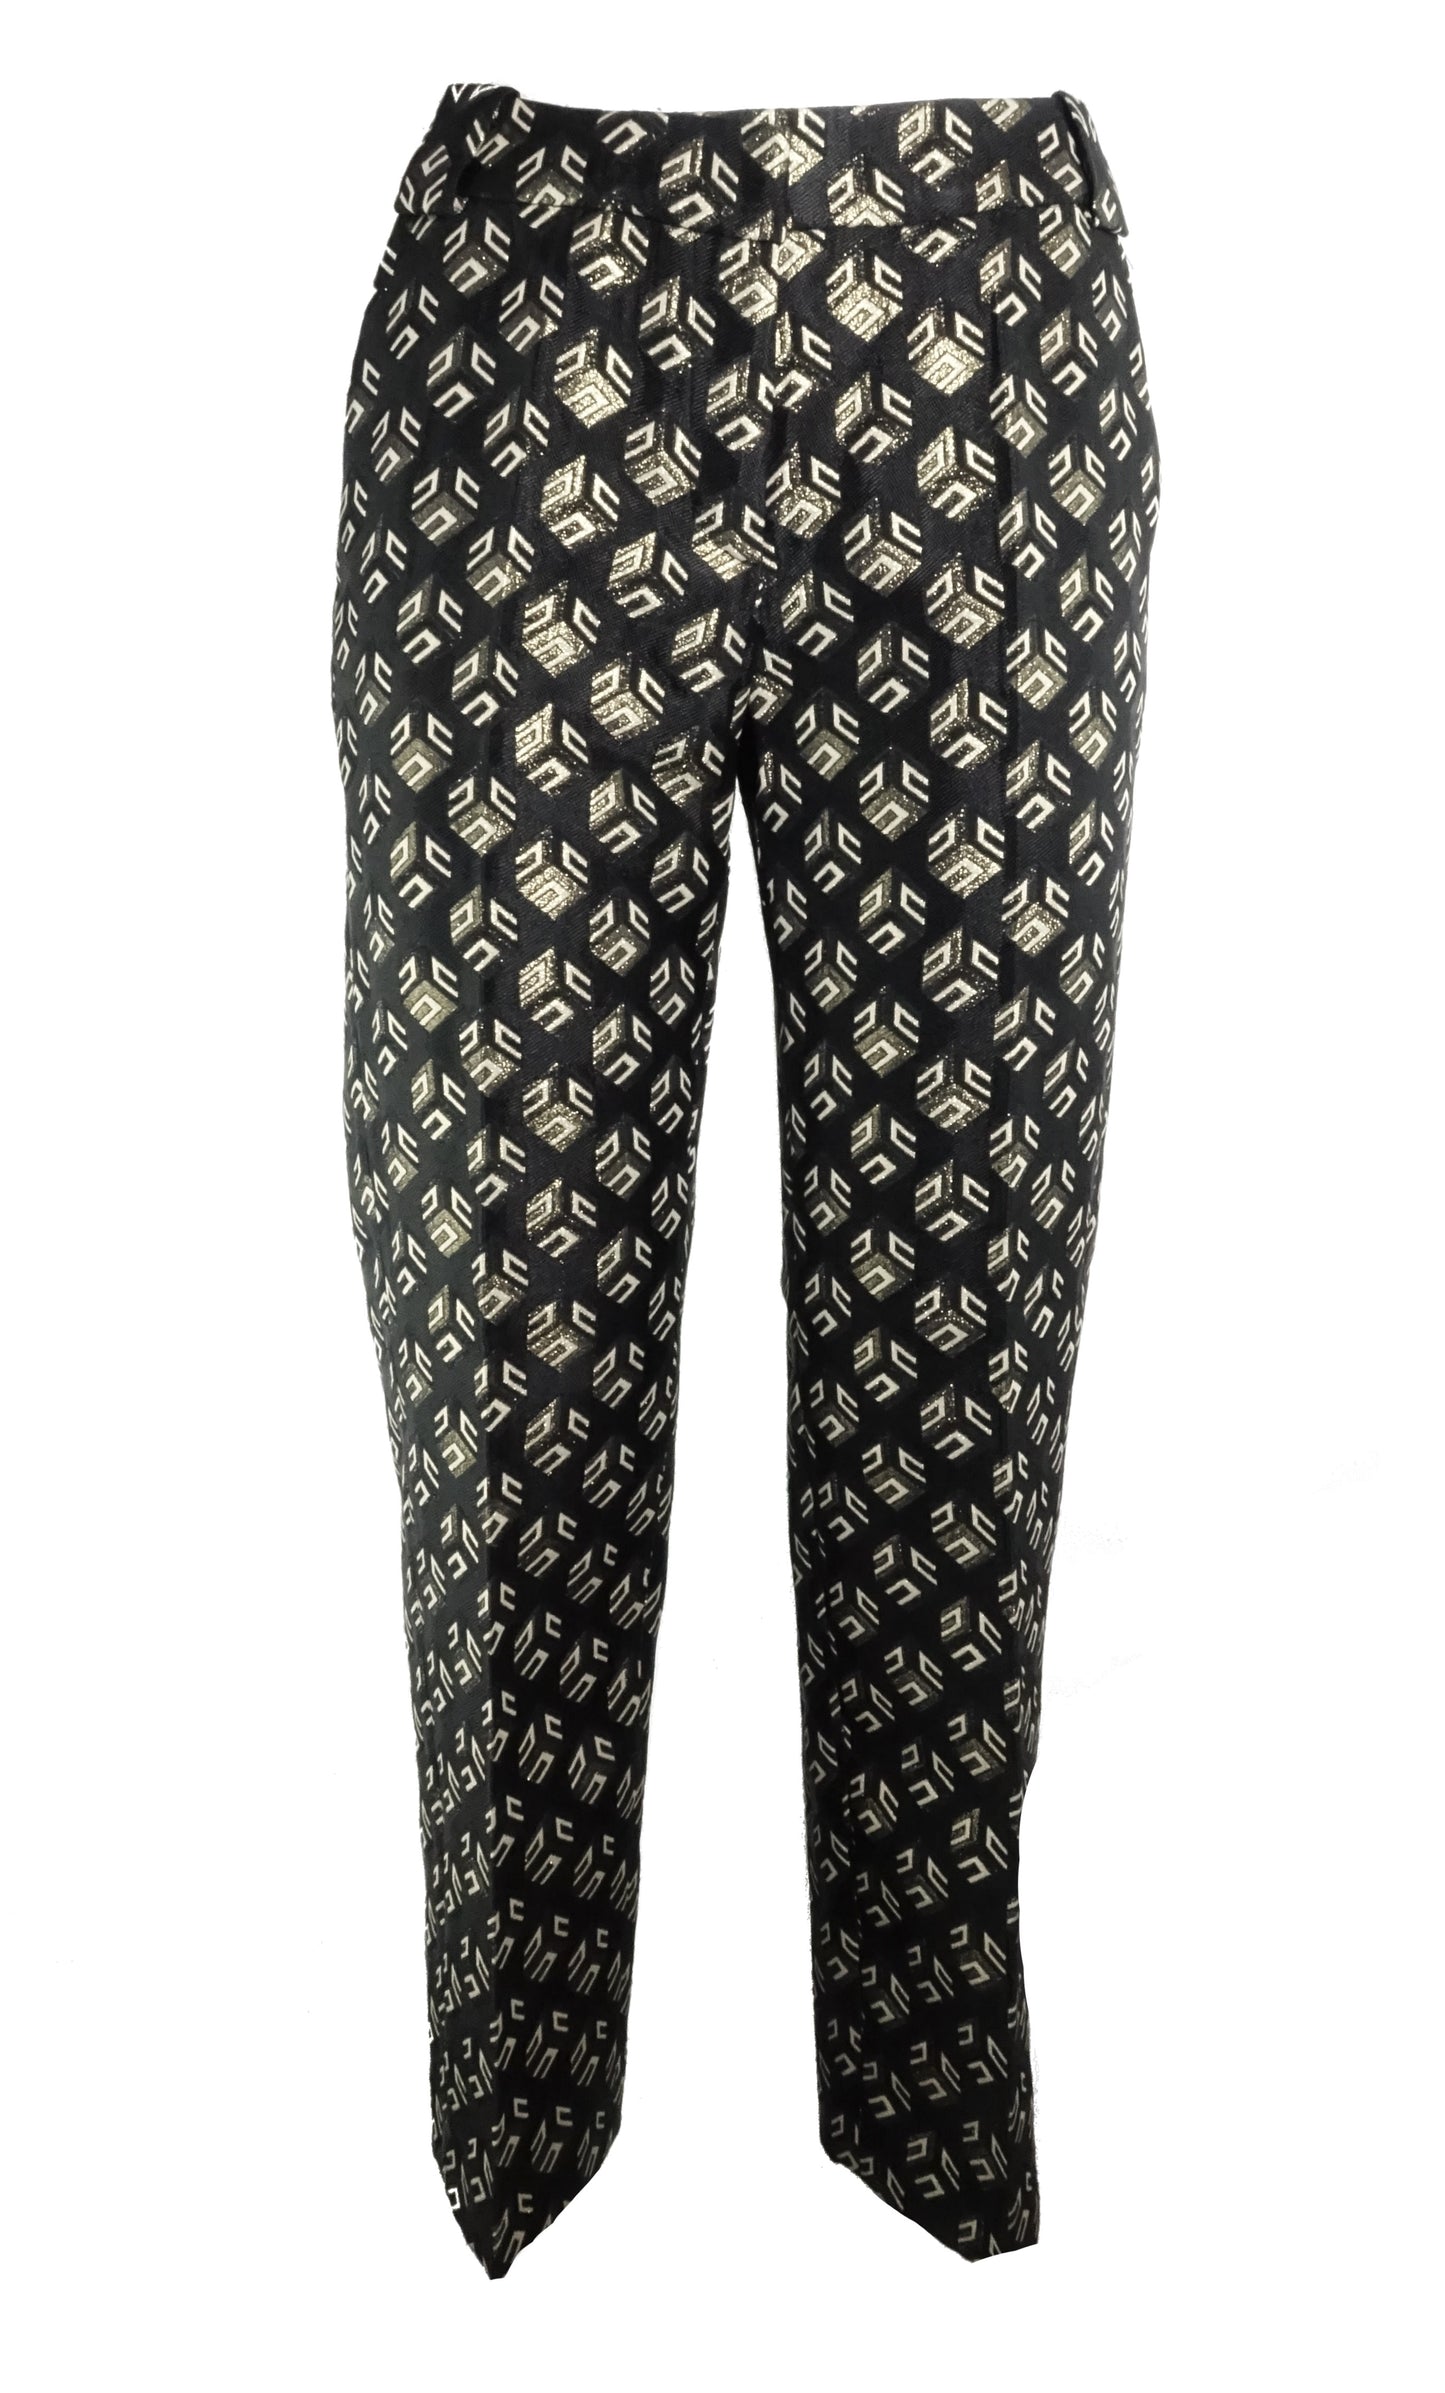 Ciro Black and Gold Brocade Trousers